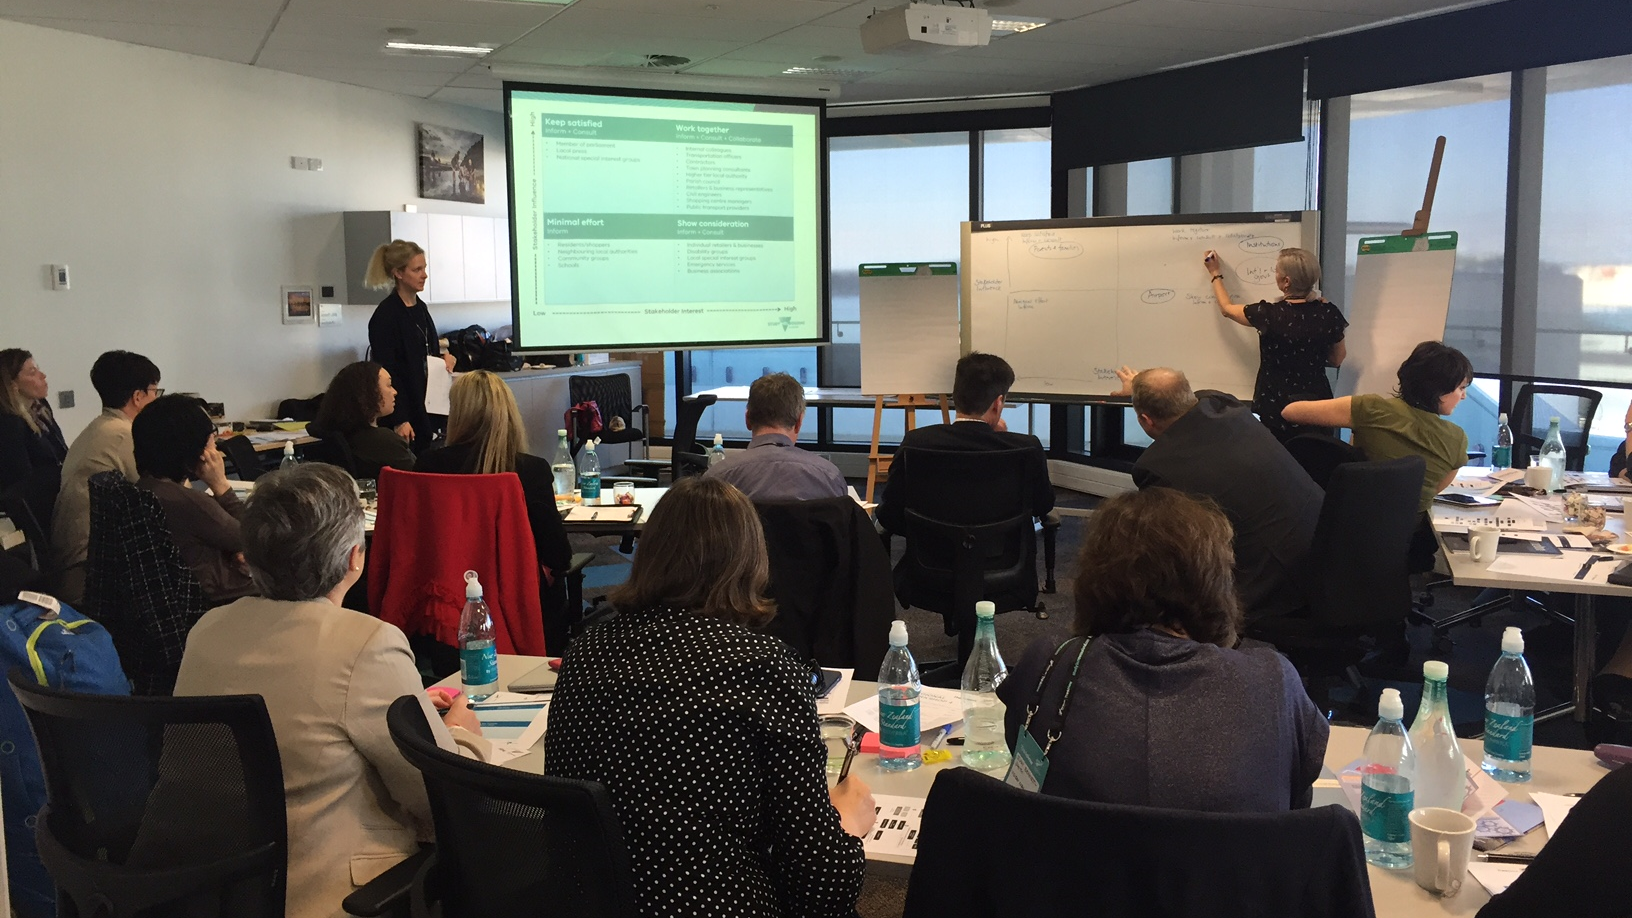 Jane Favaloro leads a great session on Stakeholder Mapping edit3